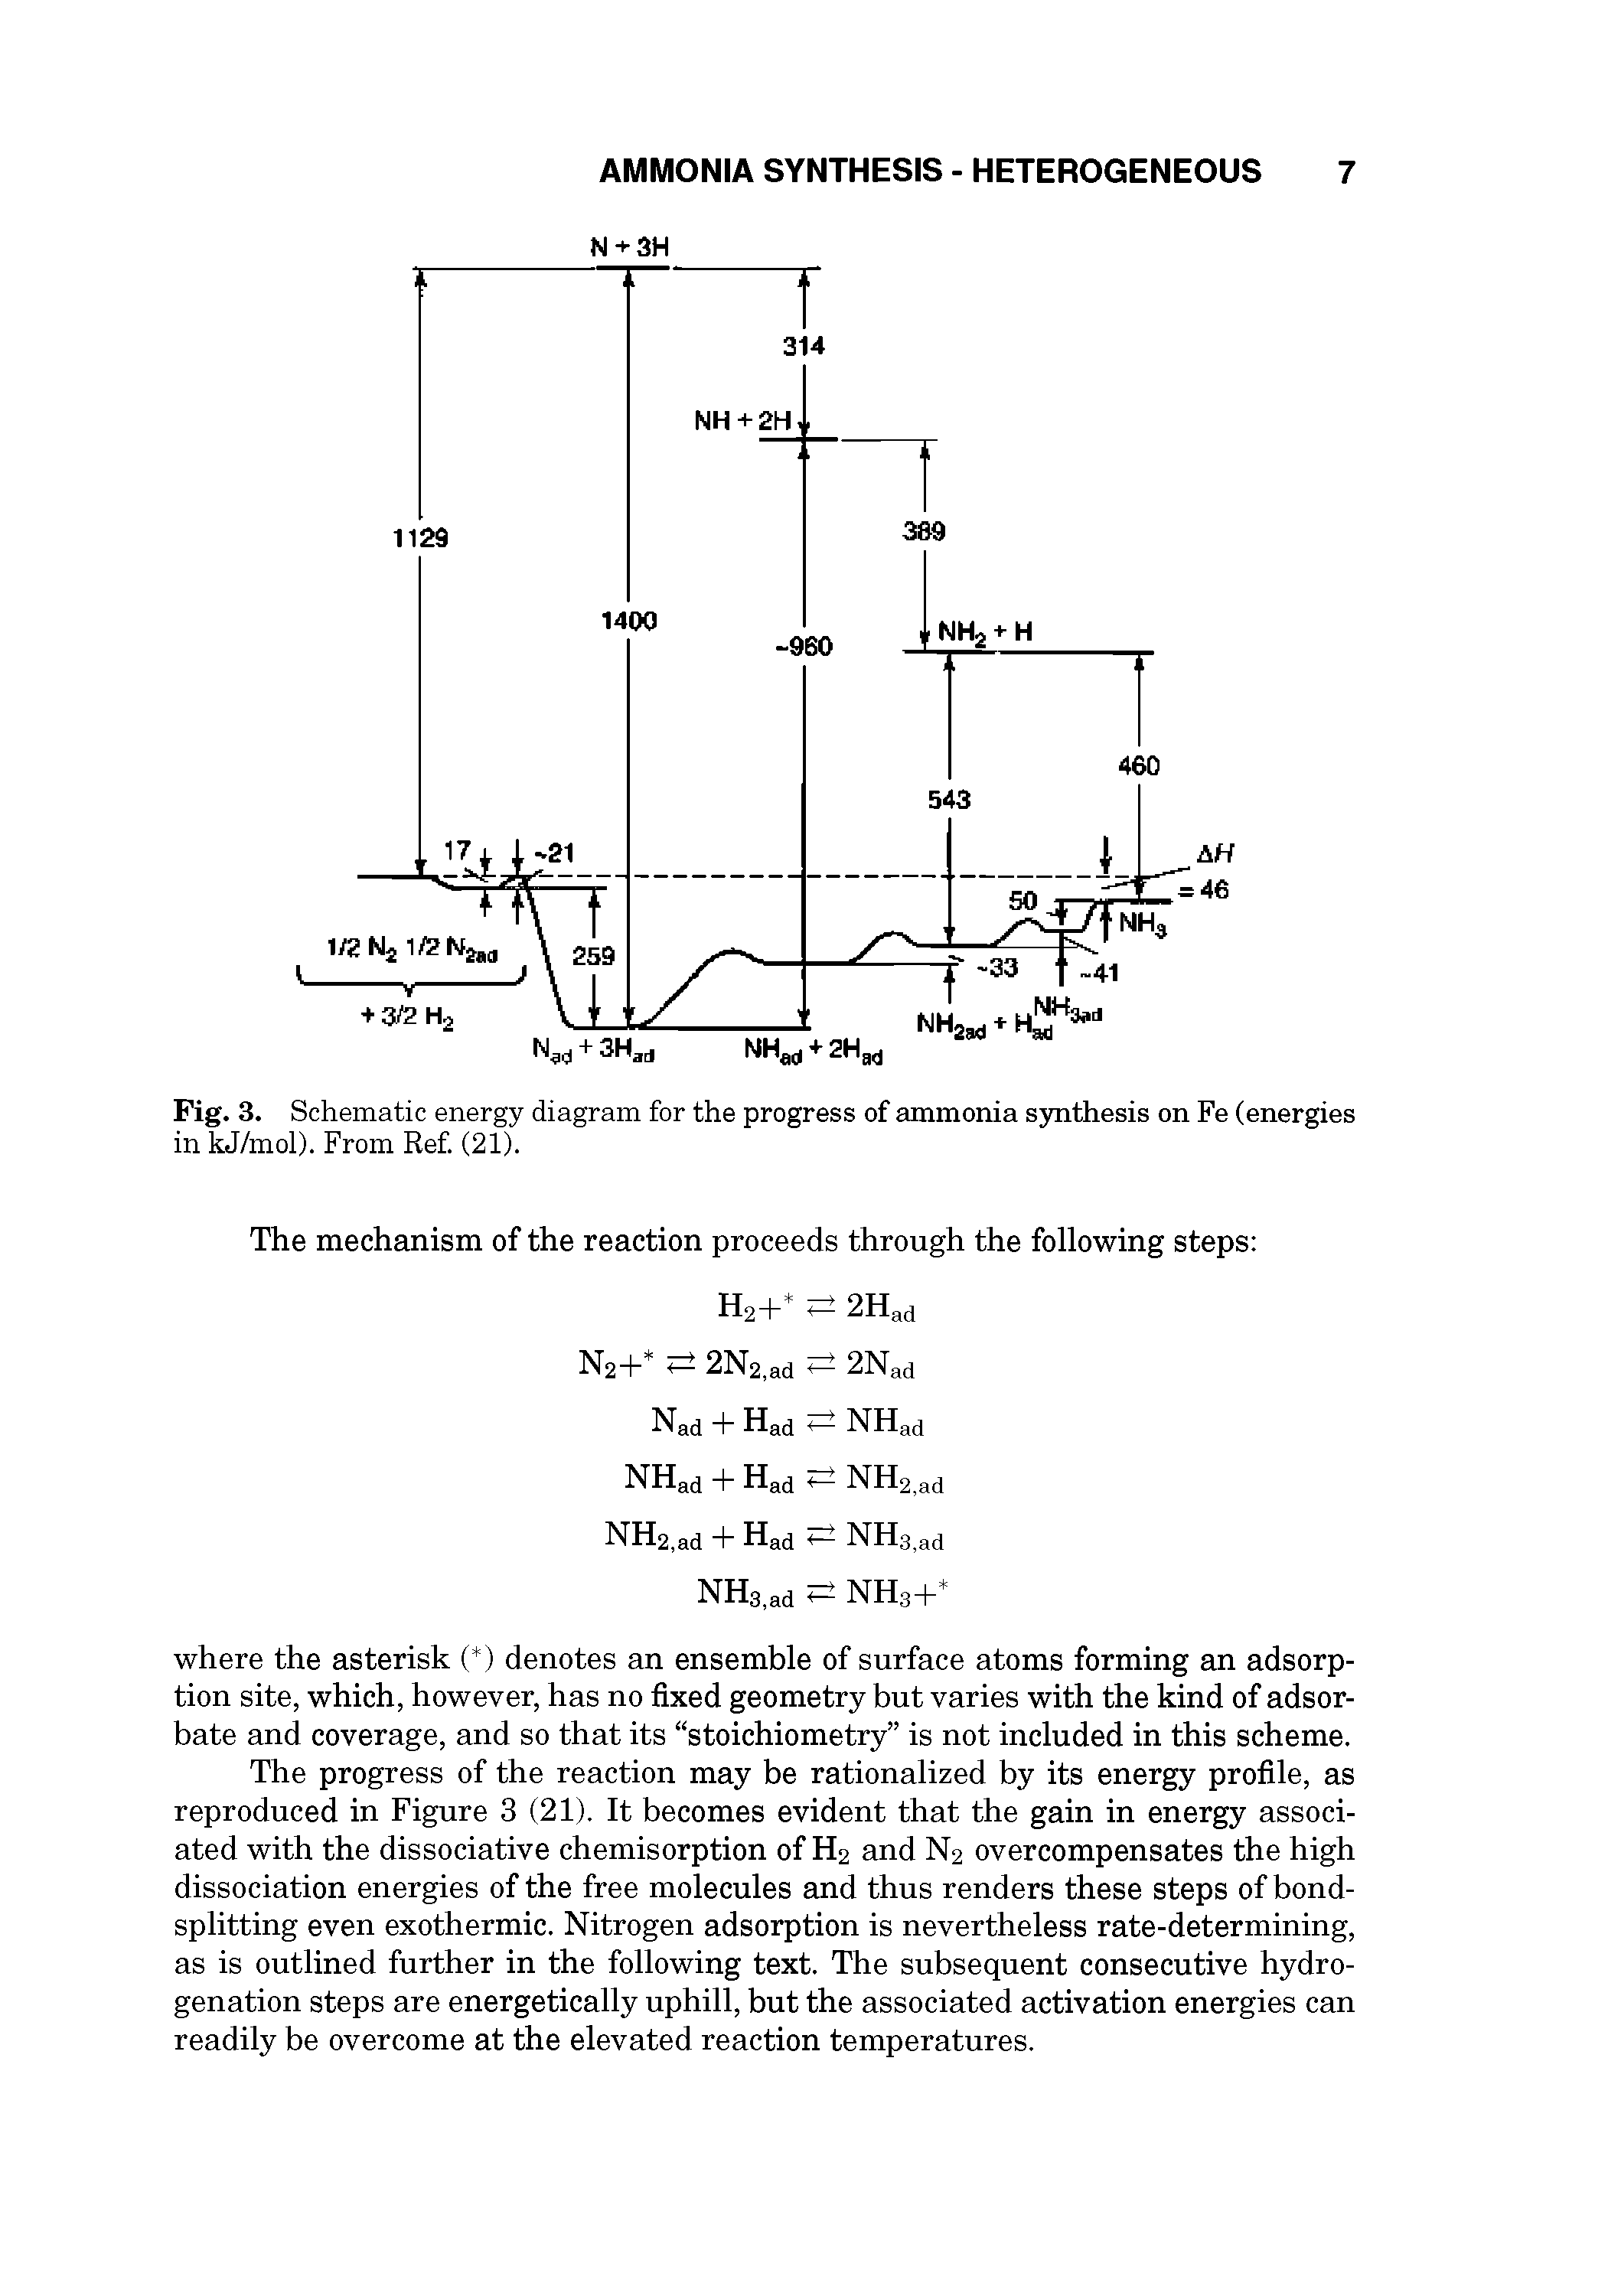 Fig. 3. Schematic energy diagram for the progress of ammonia synthesis on Fe (energies in kJ/mol). From Ref. (21).